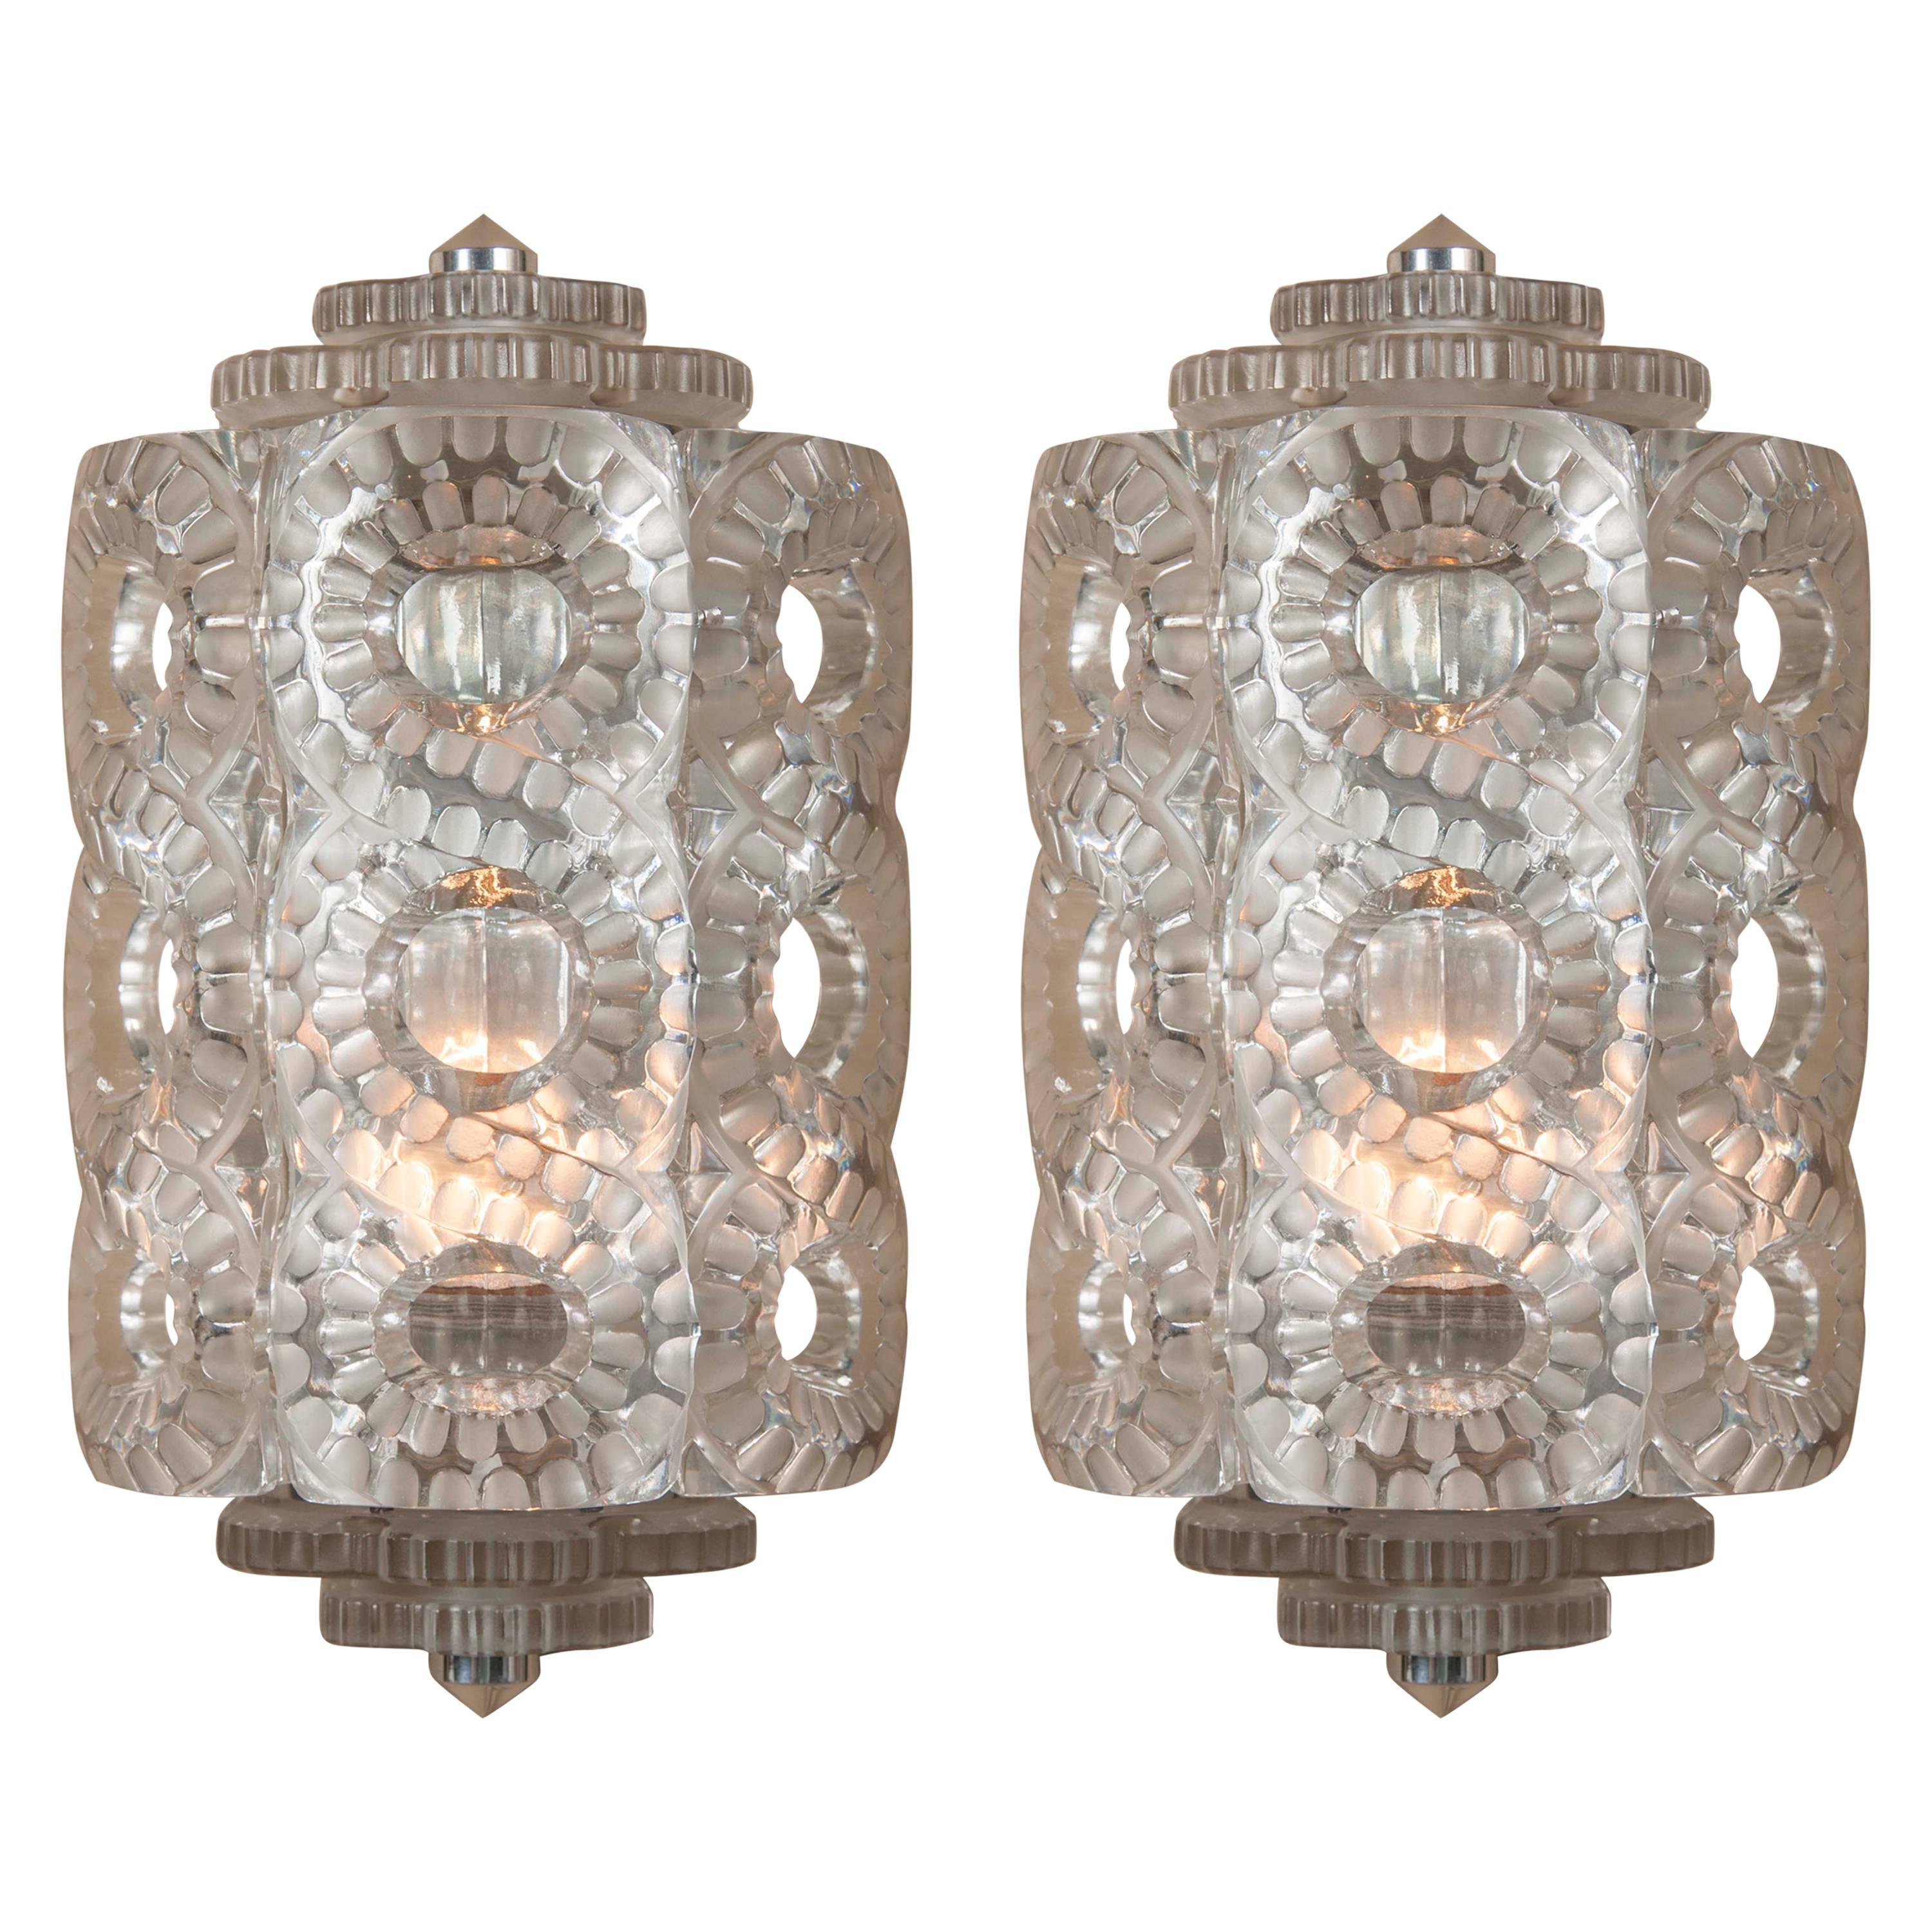 Pair of Lalique "Seville" Frosted Glass Sconces